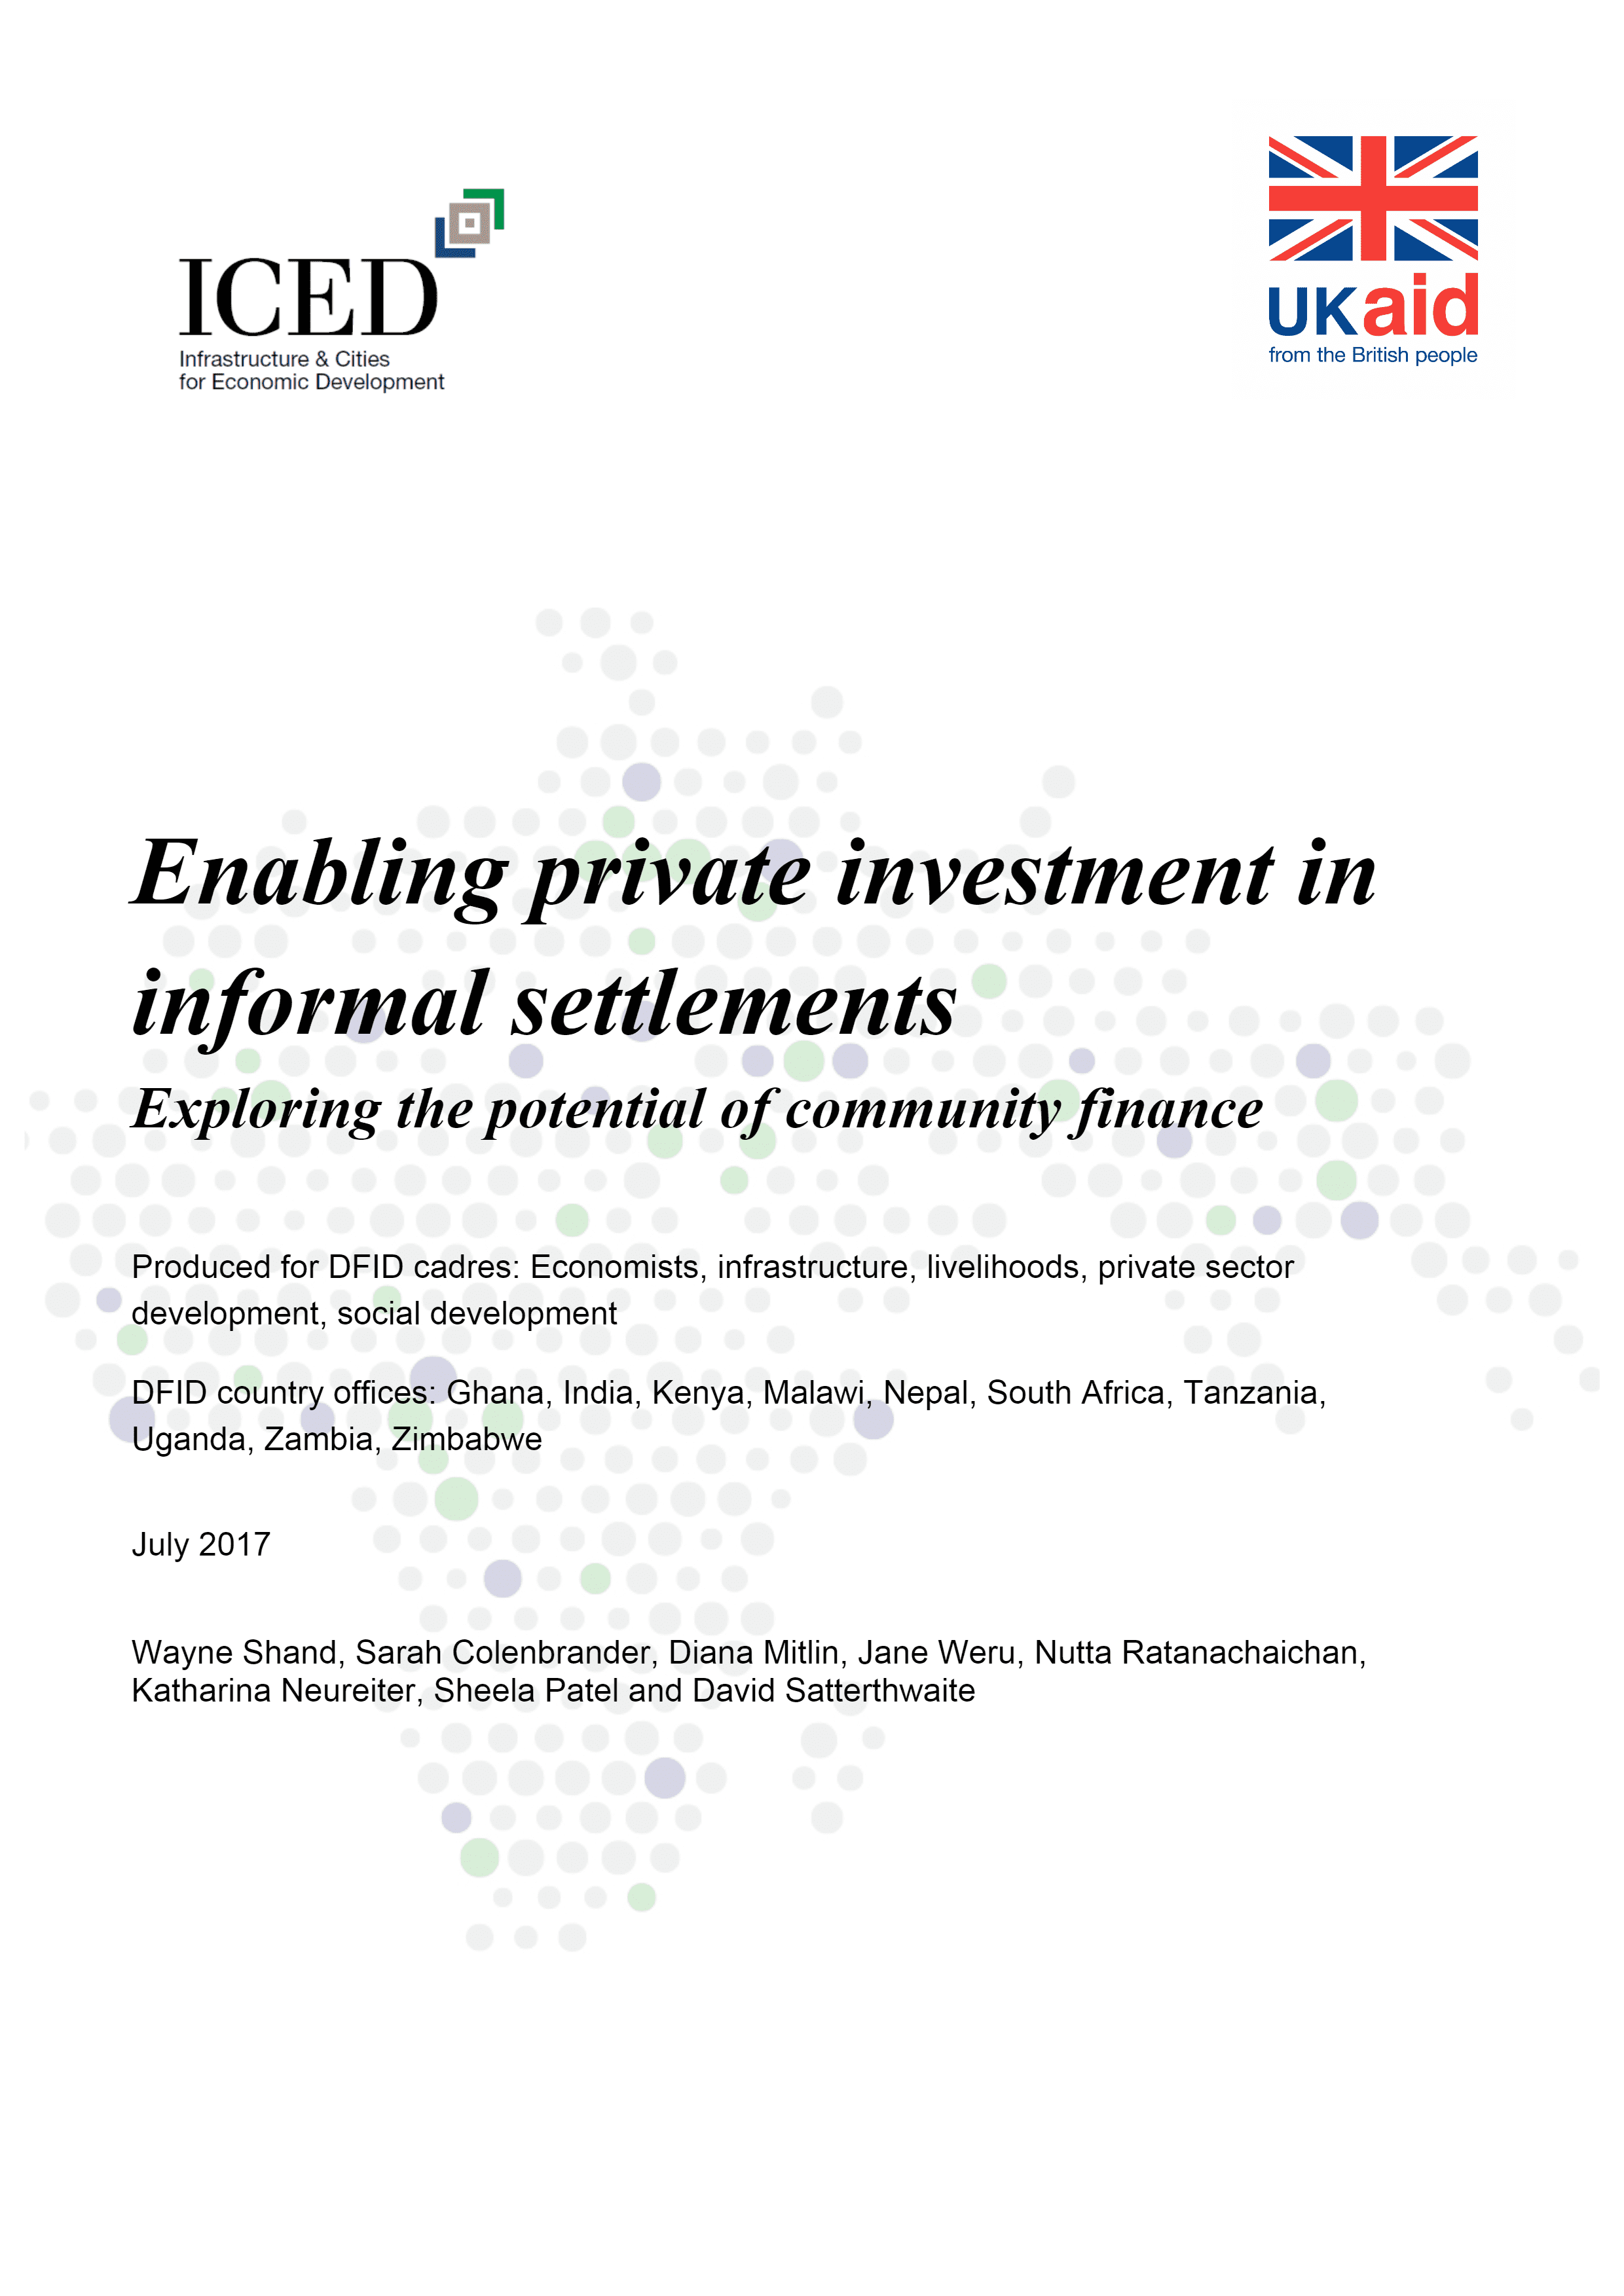 Enabling private investment in informal settlements